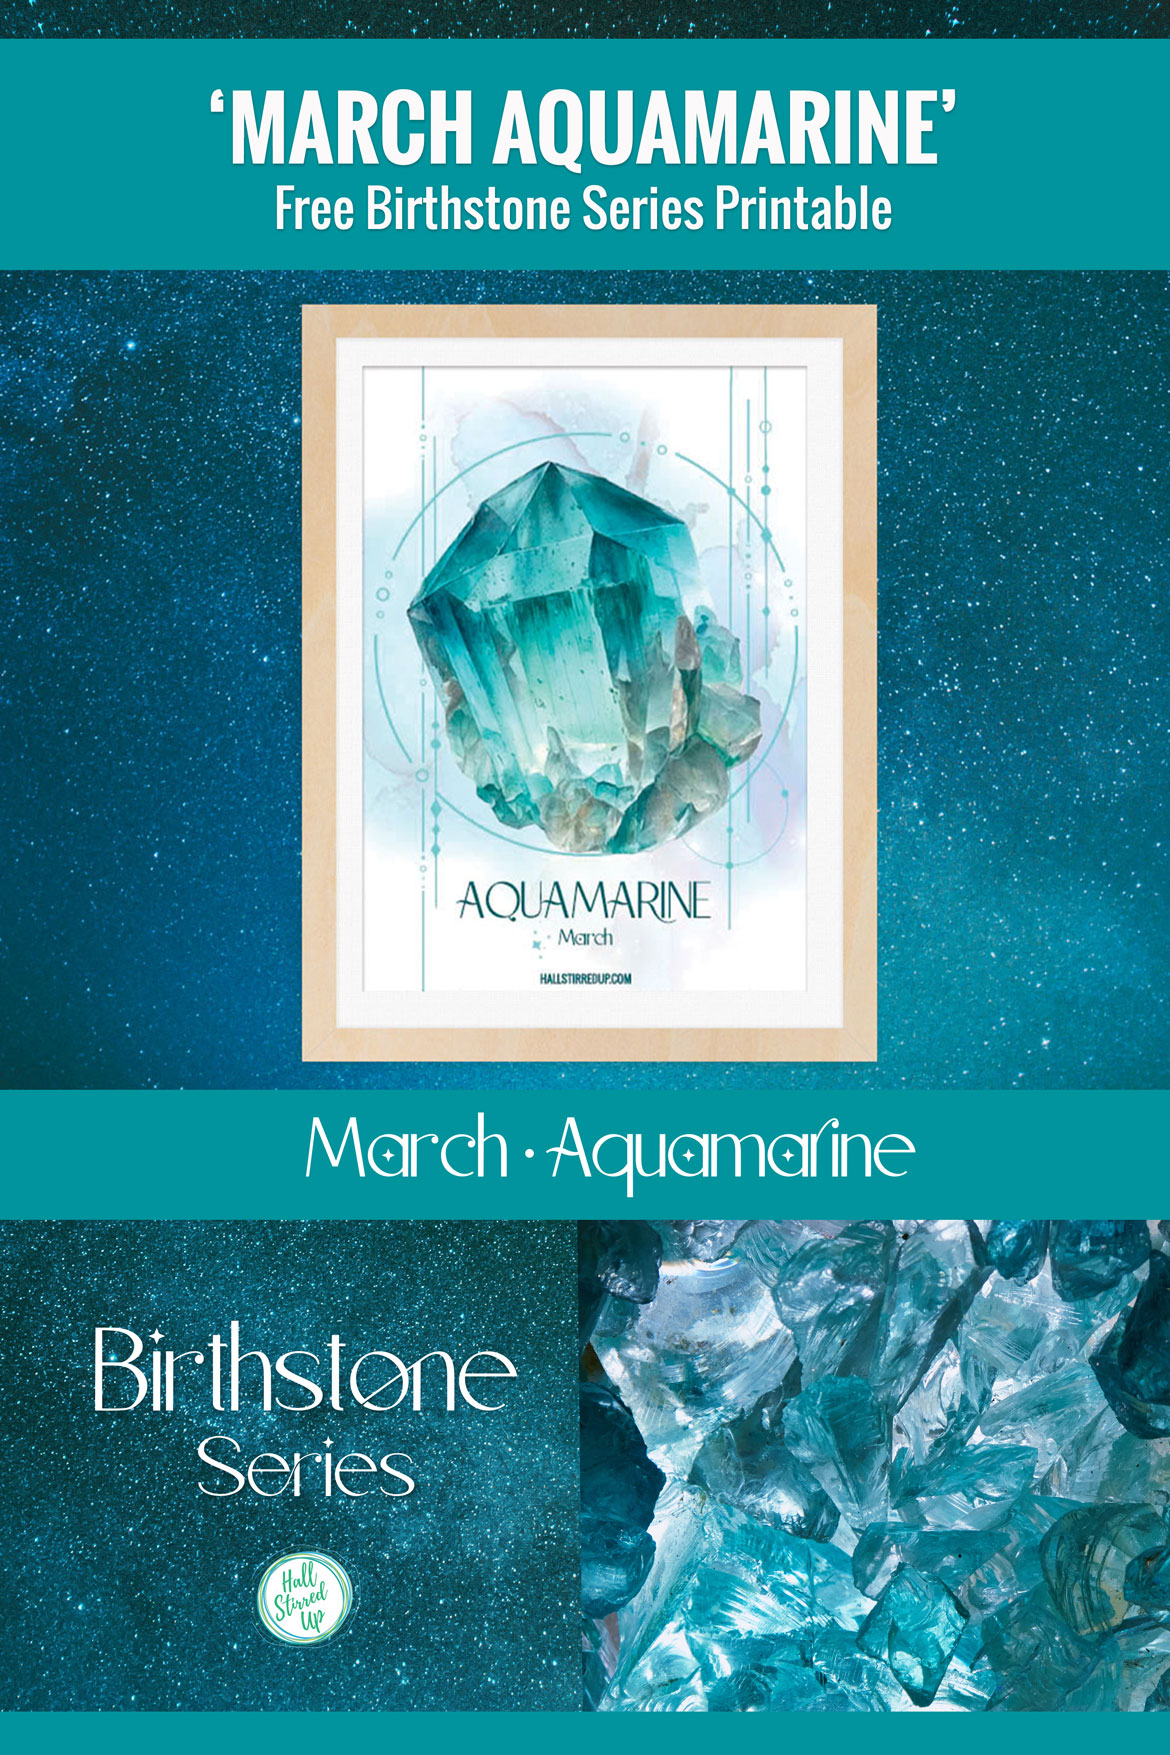 March's birthstone is the gorgeous Aquamarine - with free printable